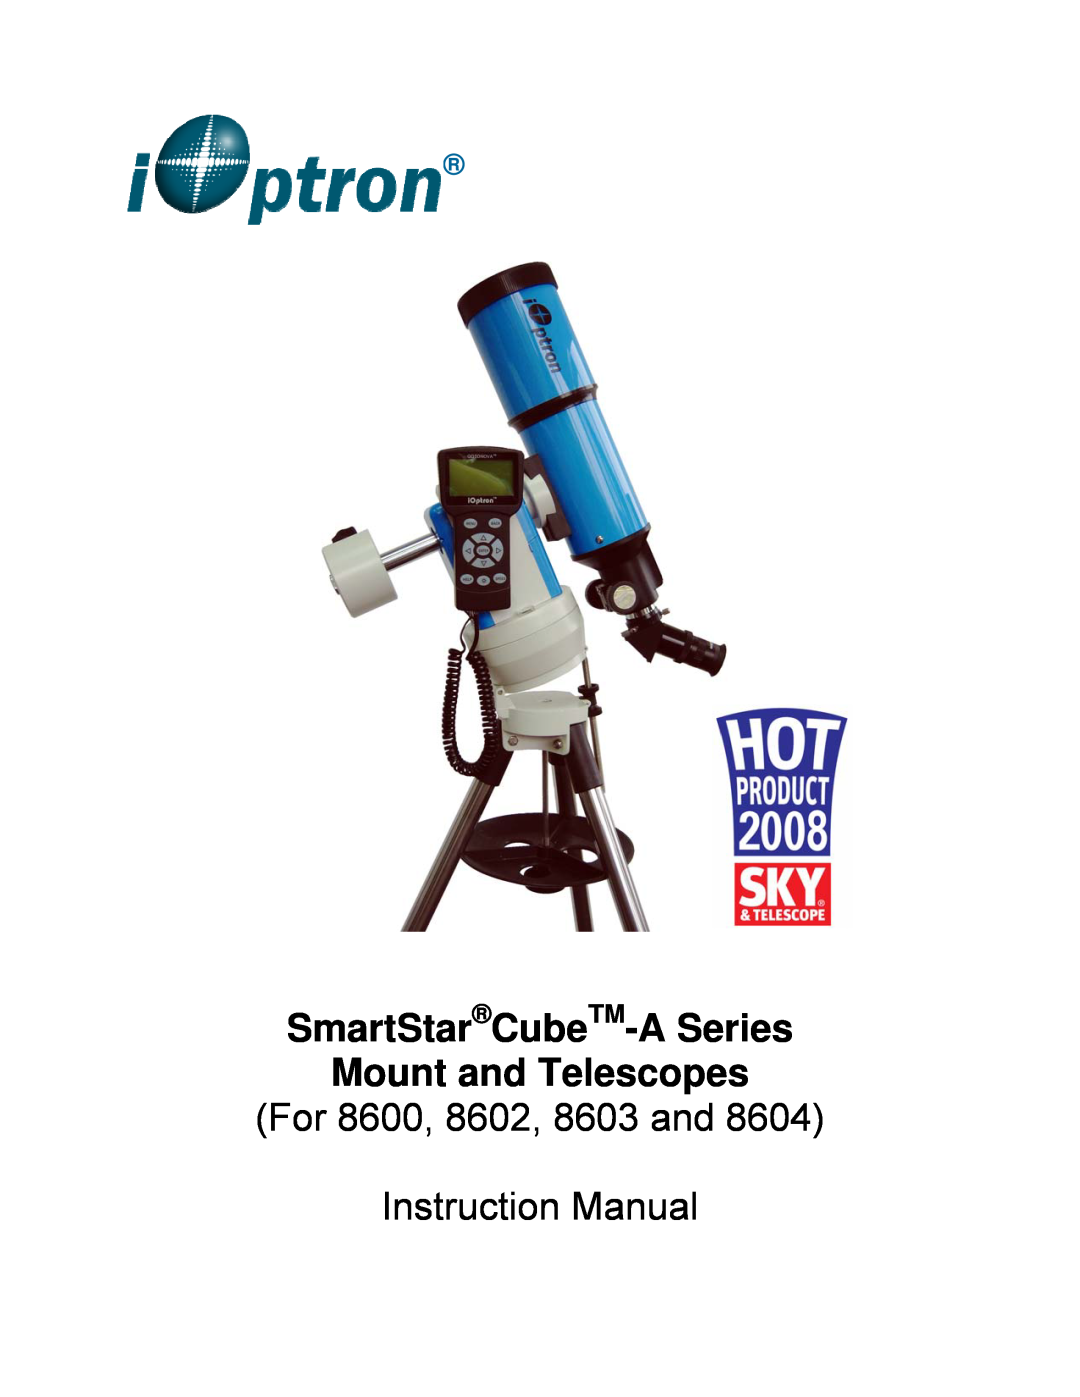 iOptron 8603, 8600 quick start Preparing the Tripod, Attaching the Mount, a. Installing Batteries, Attaching Telescope 